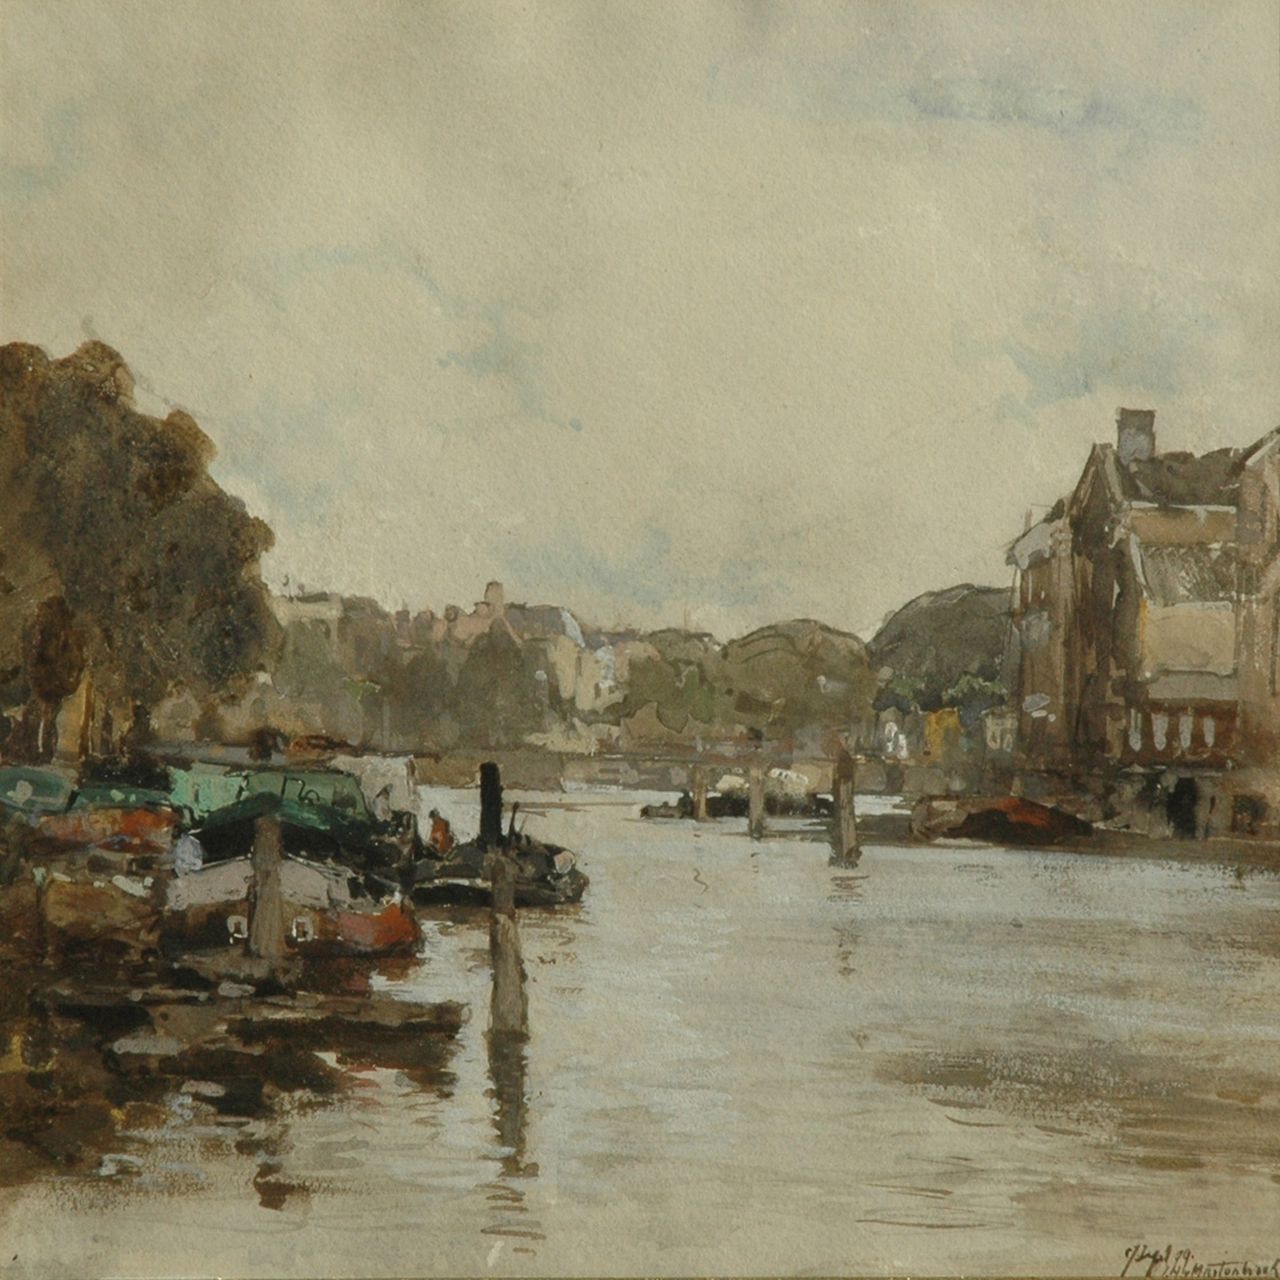 Mastenbroek J.H. van | Johan Hendrik van Mastenbroek, Moored boats in a canal in a Dutch town, watercolour on paper 25.5 x 25.5 cm, signed l.r. and dated Sept. '99